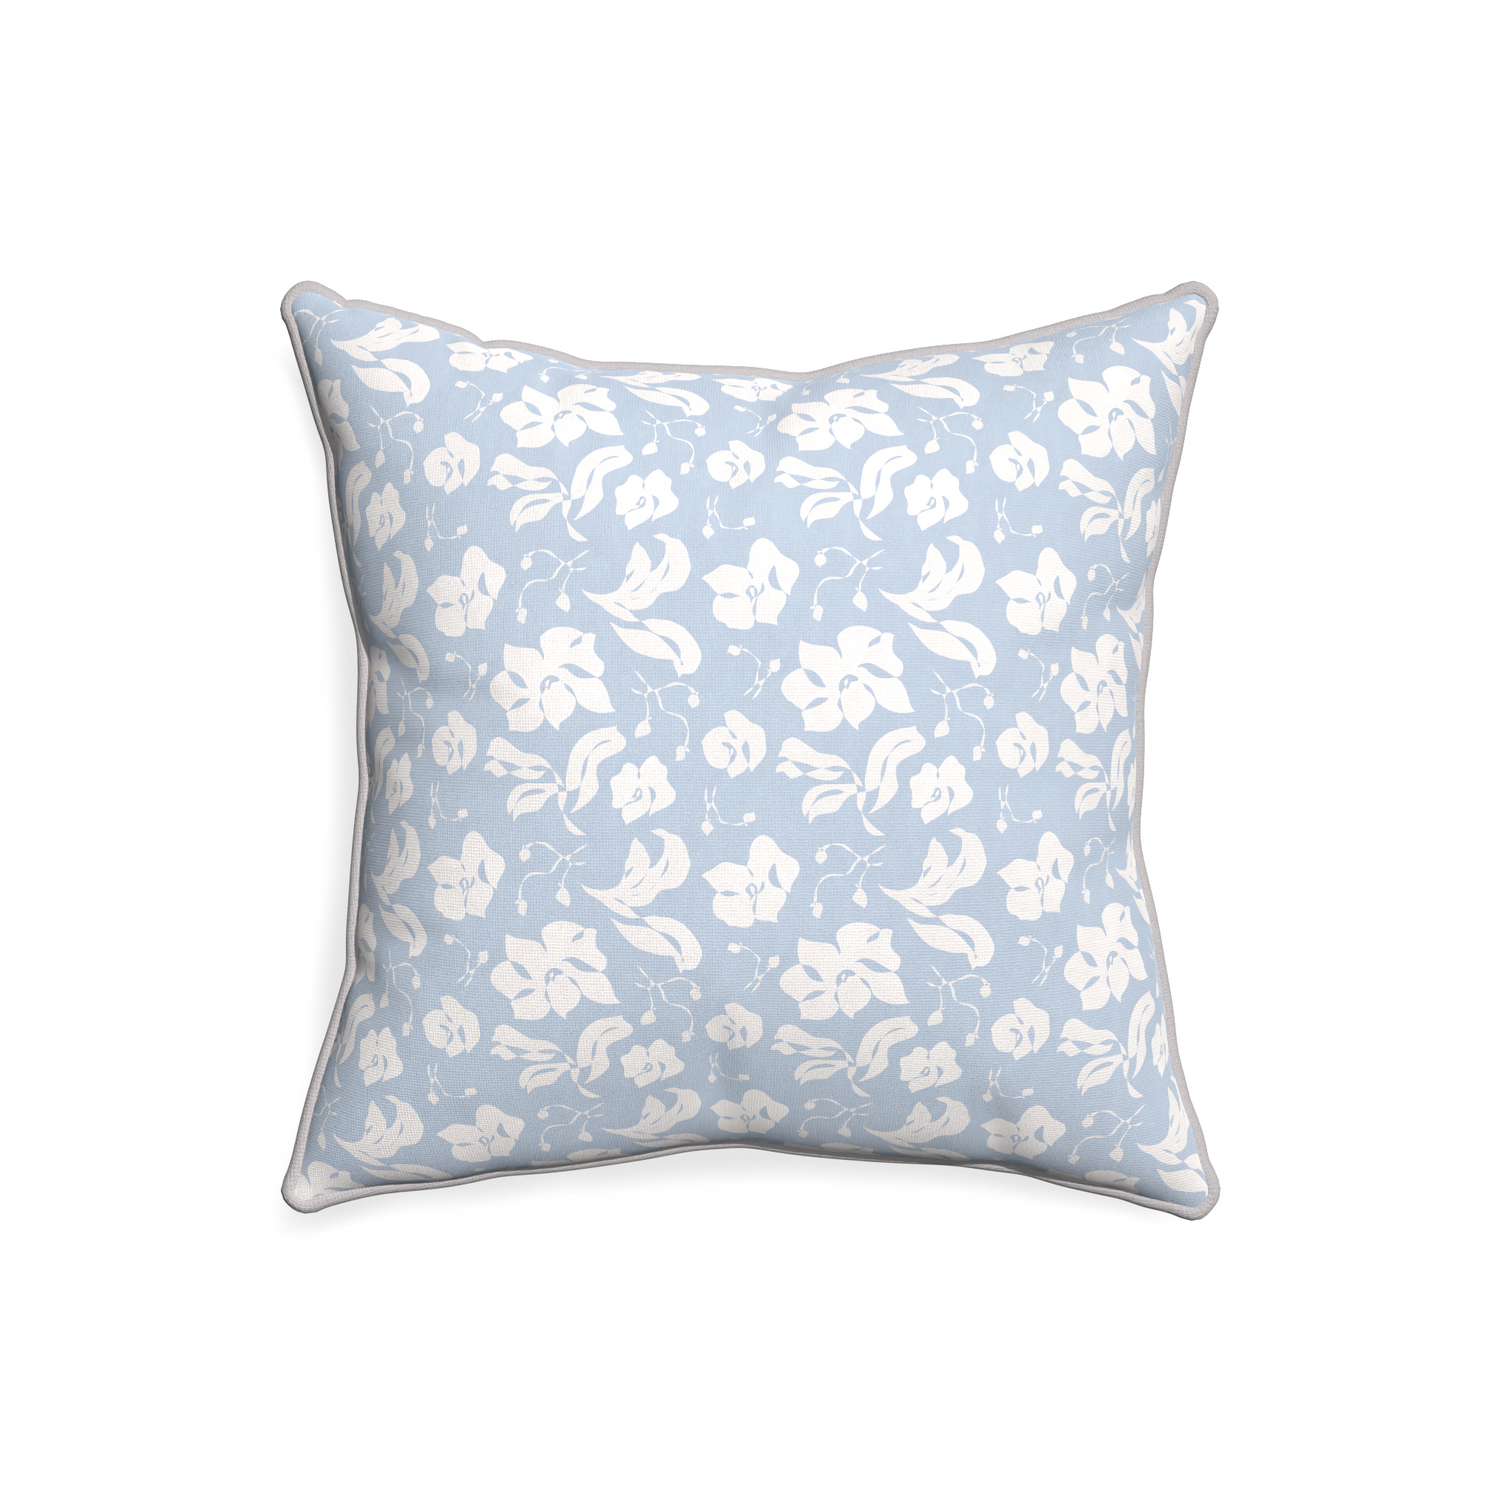 20-square georgia custom cornflower blue floralpillow with pebble piping on white background